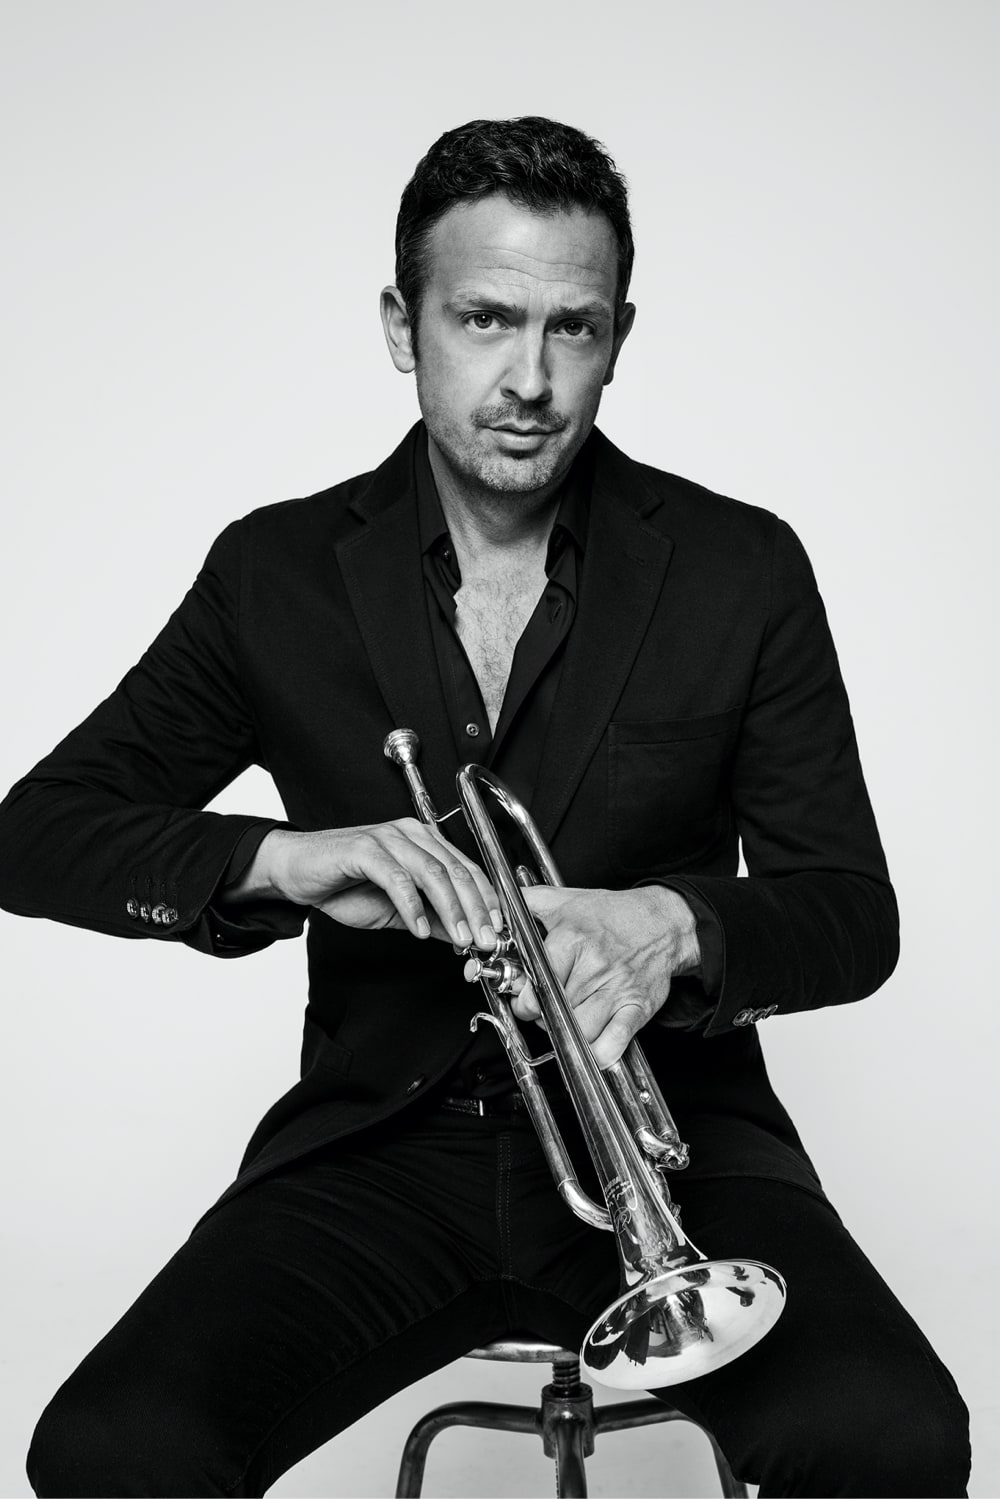 The musician Till Brönner is sitting on a stool. He is fixing something on his trumpet. His shirt is casually open and he looks directly into the camera.